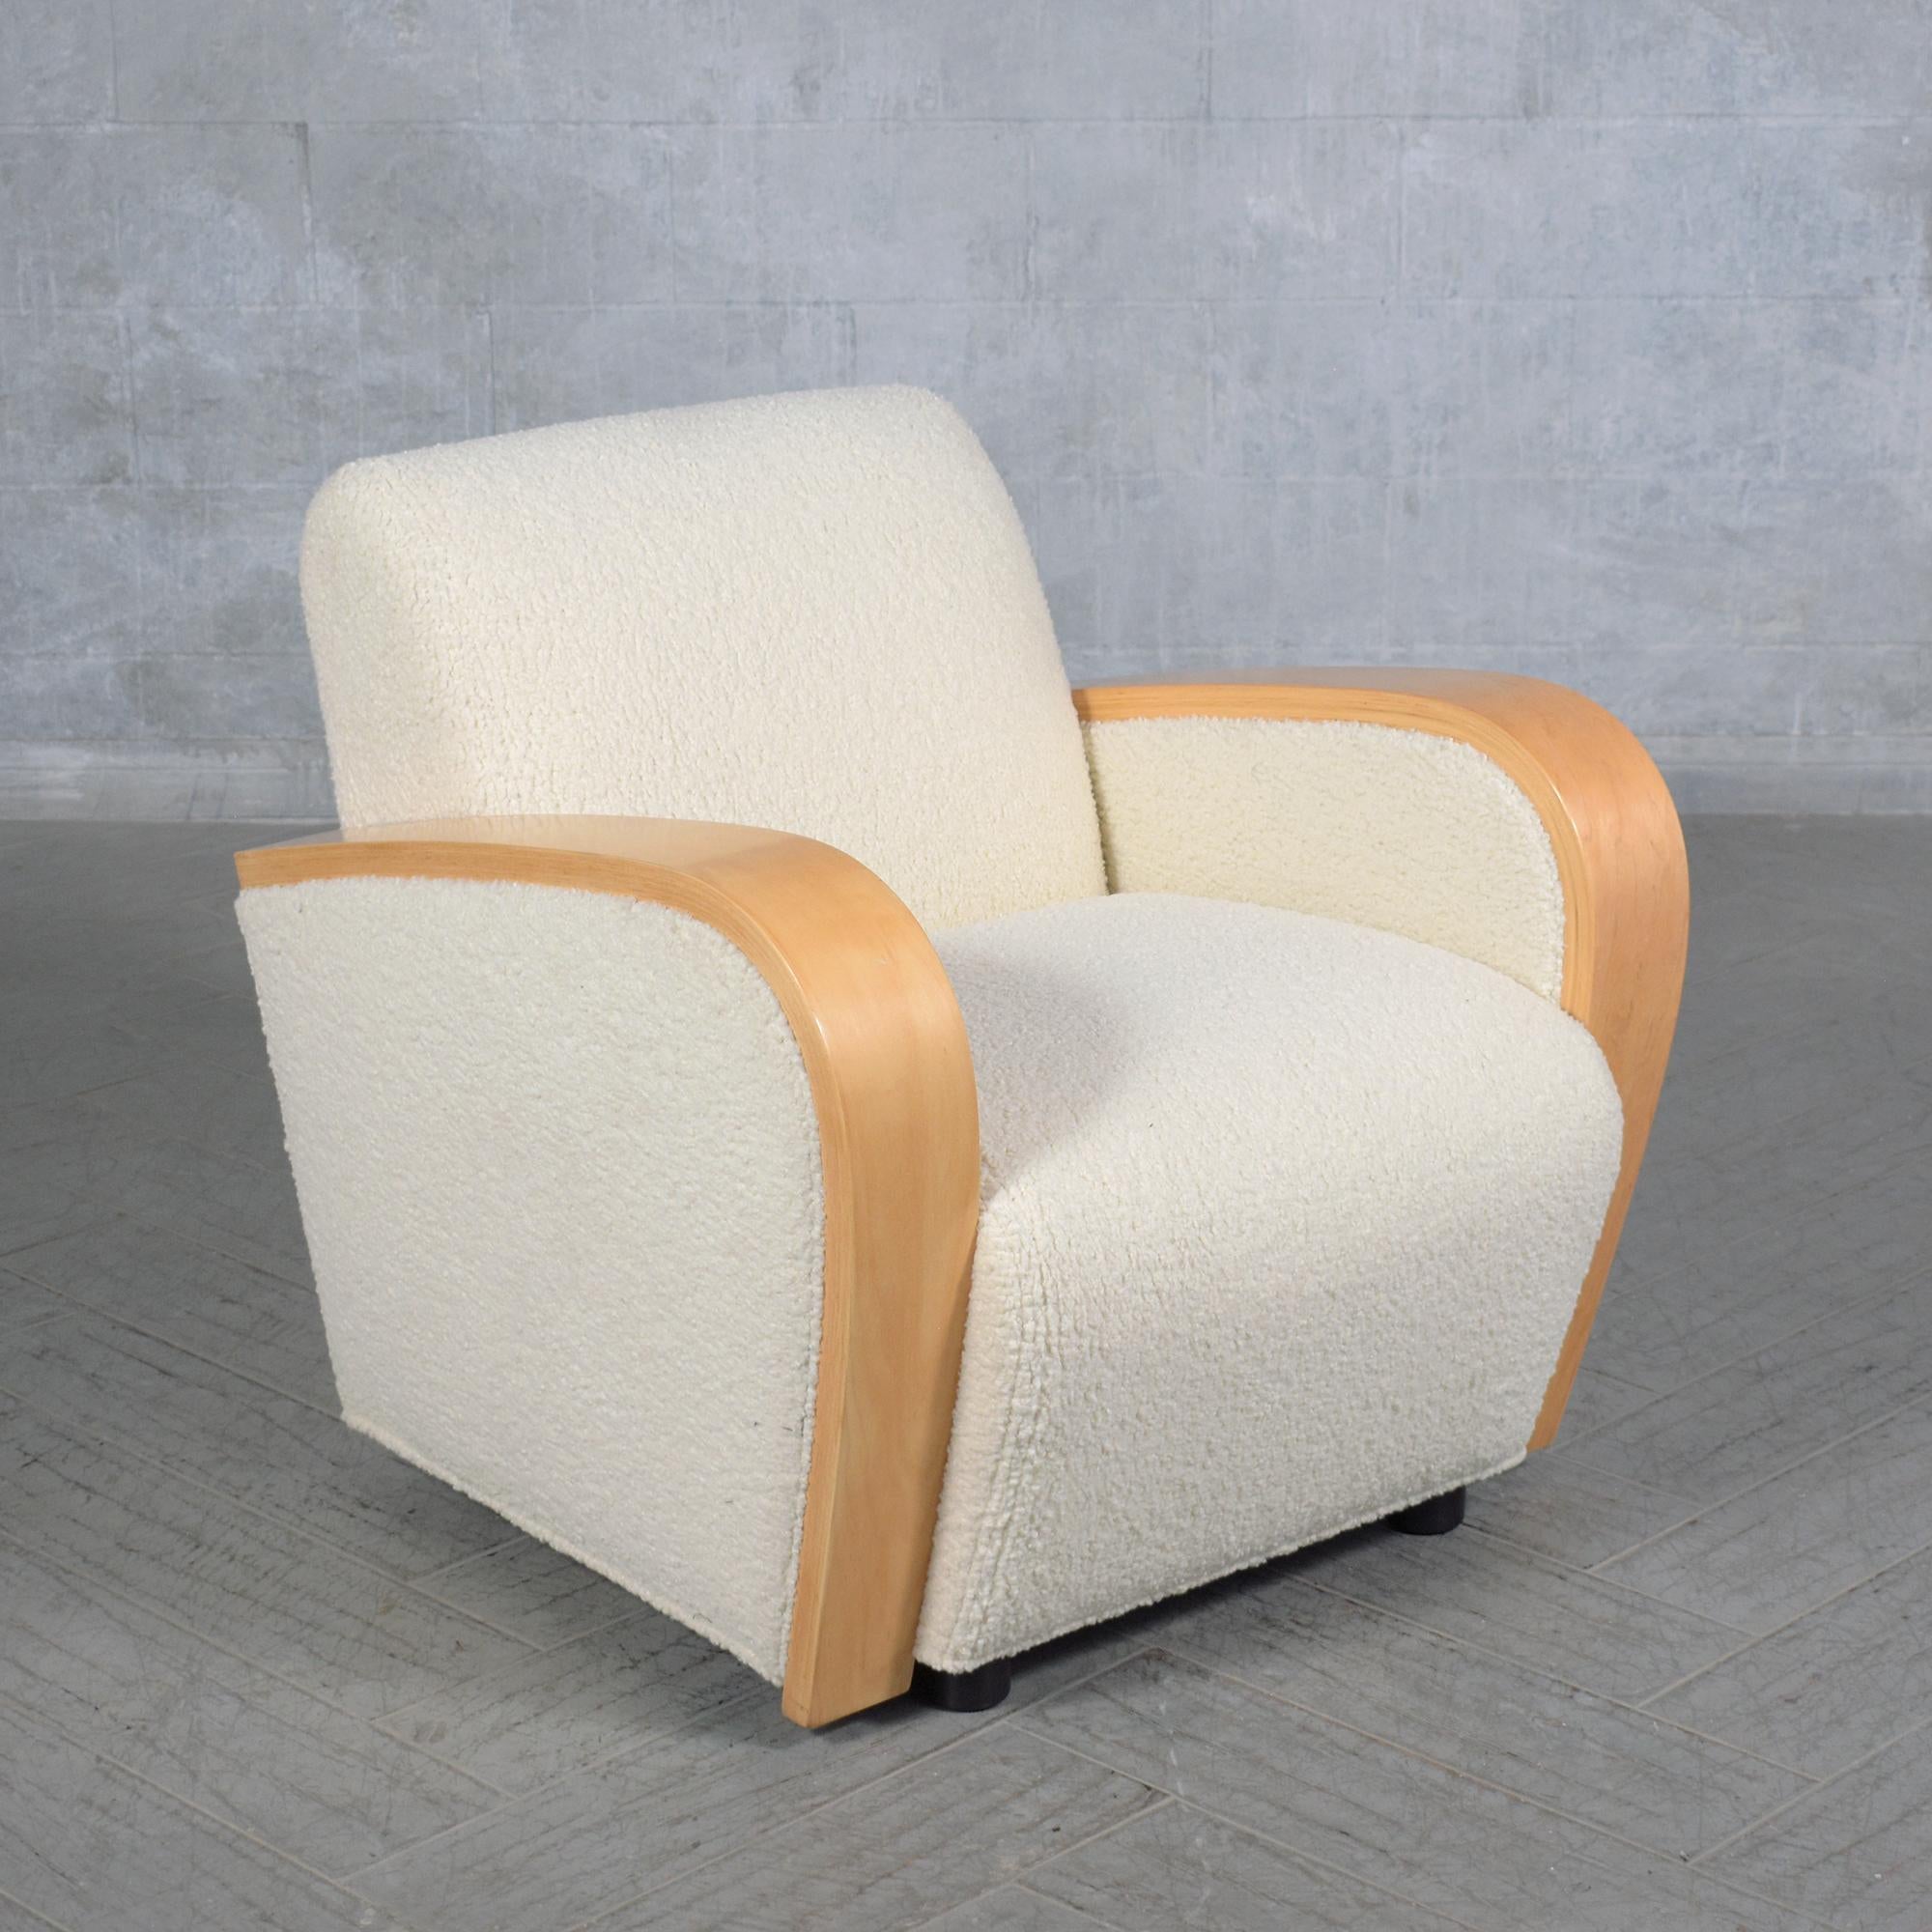 Restored Vintage Mid-Century Modern Lounge Chairs with Curved Wood Armrests For Sale 1